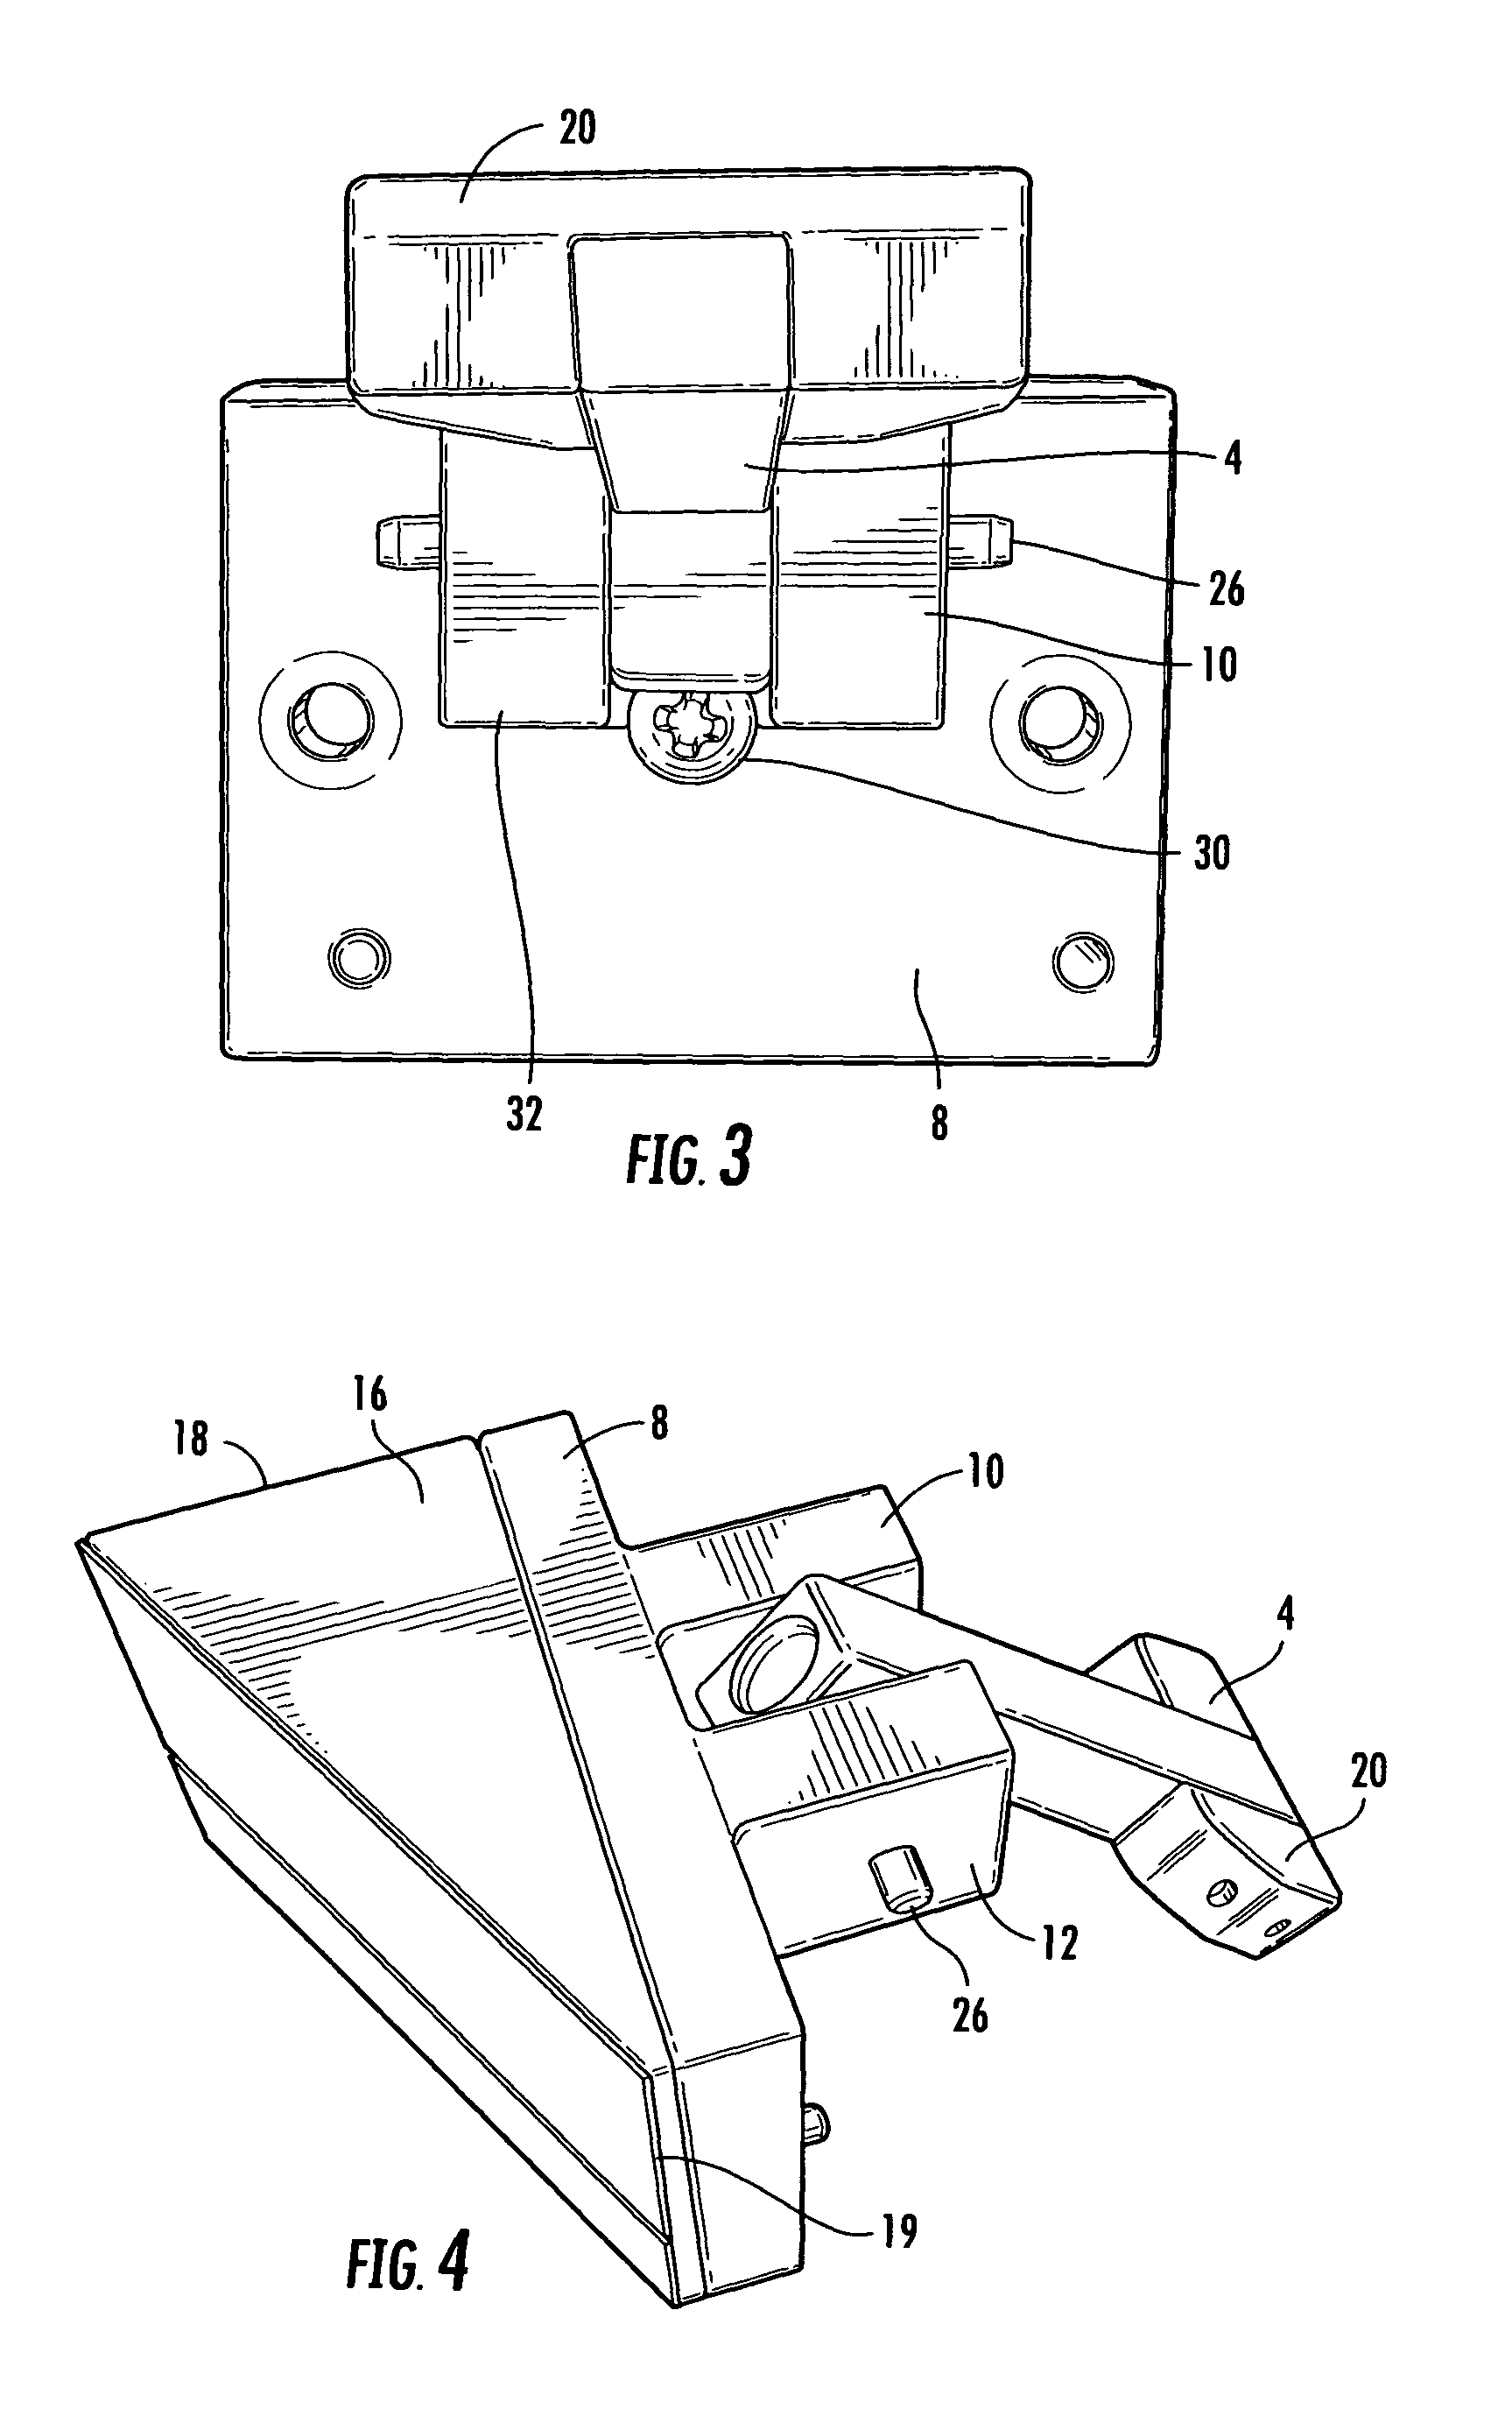 Door mounted finger safety device